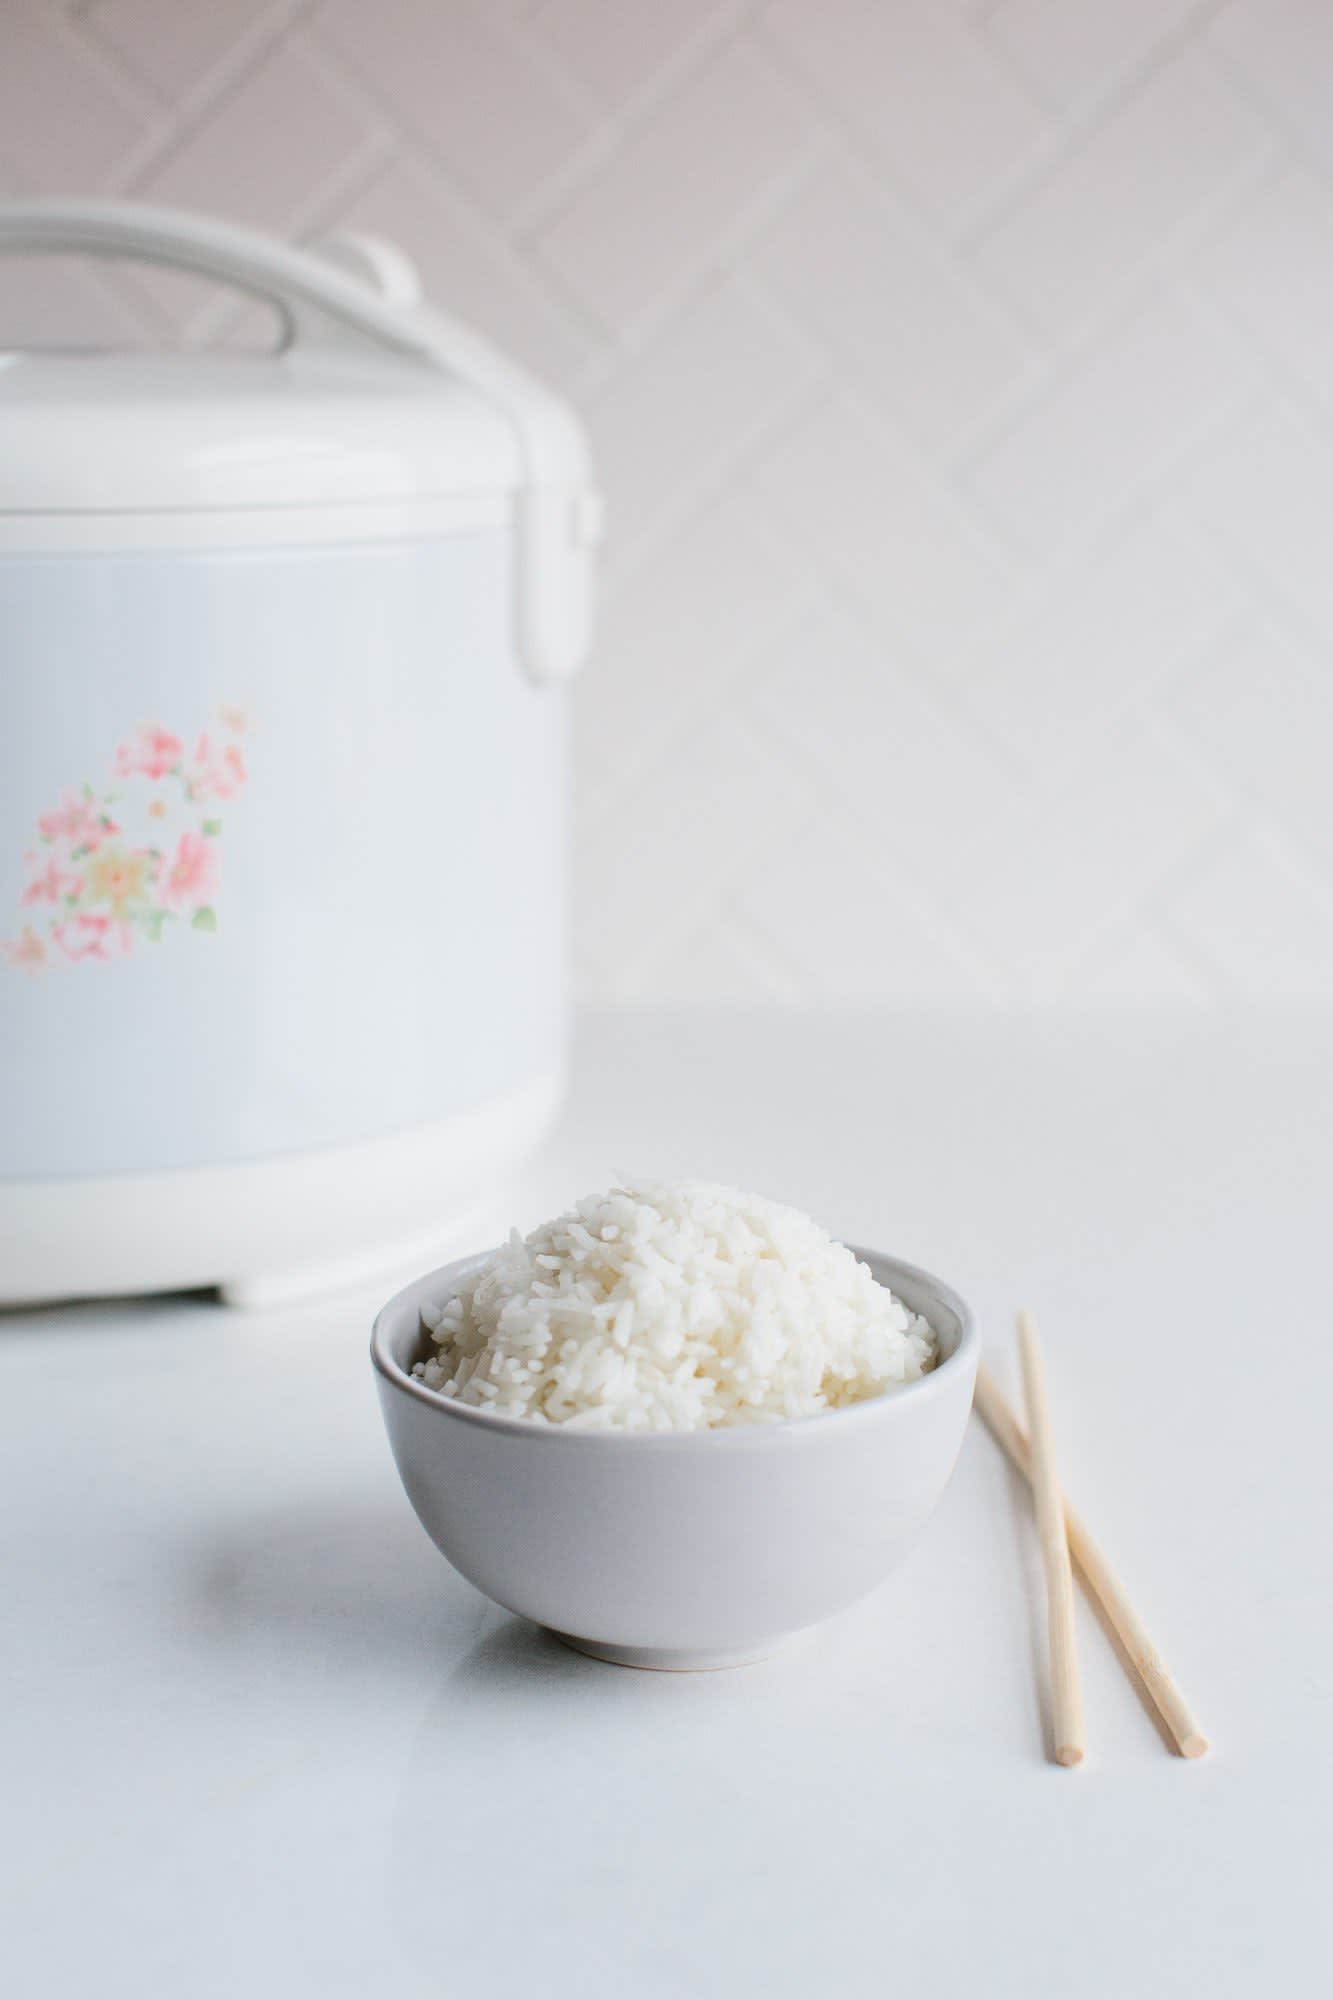 National Rice Cooker Directions